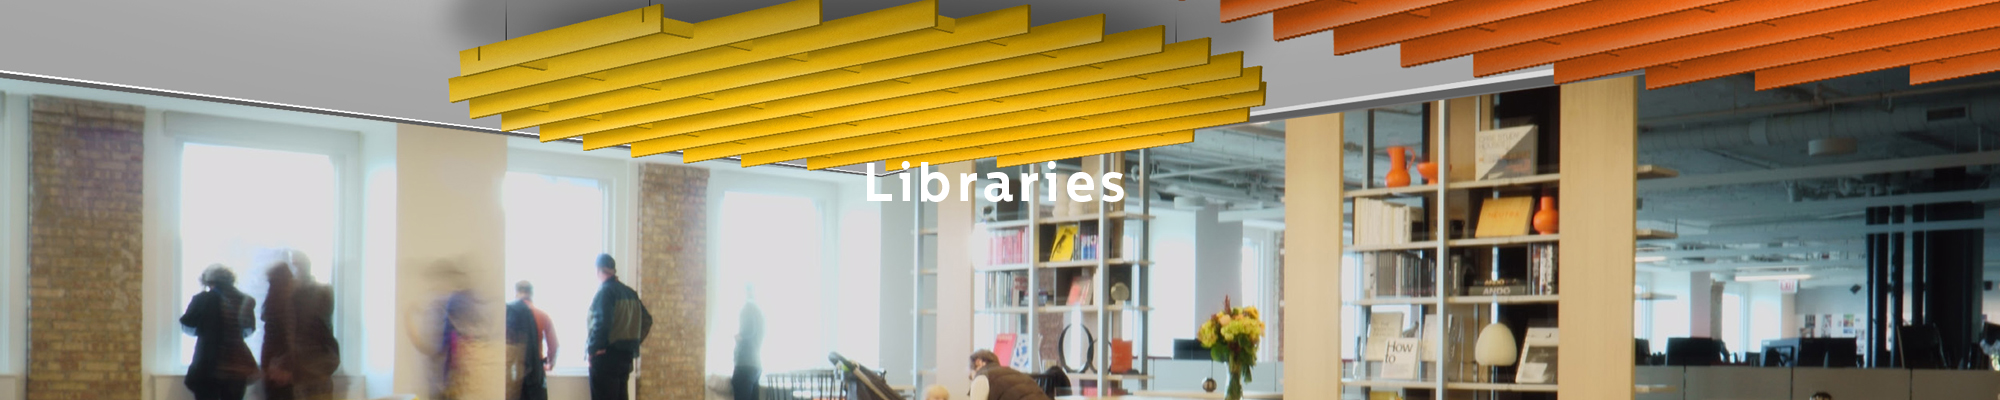 Libraries sound absorbing panels